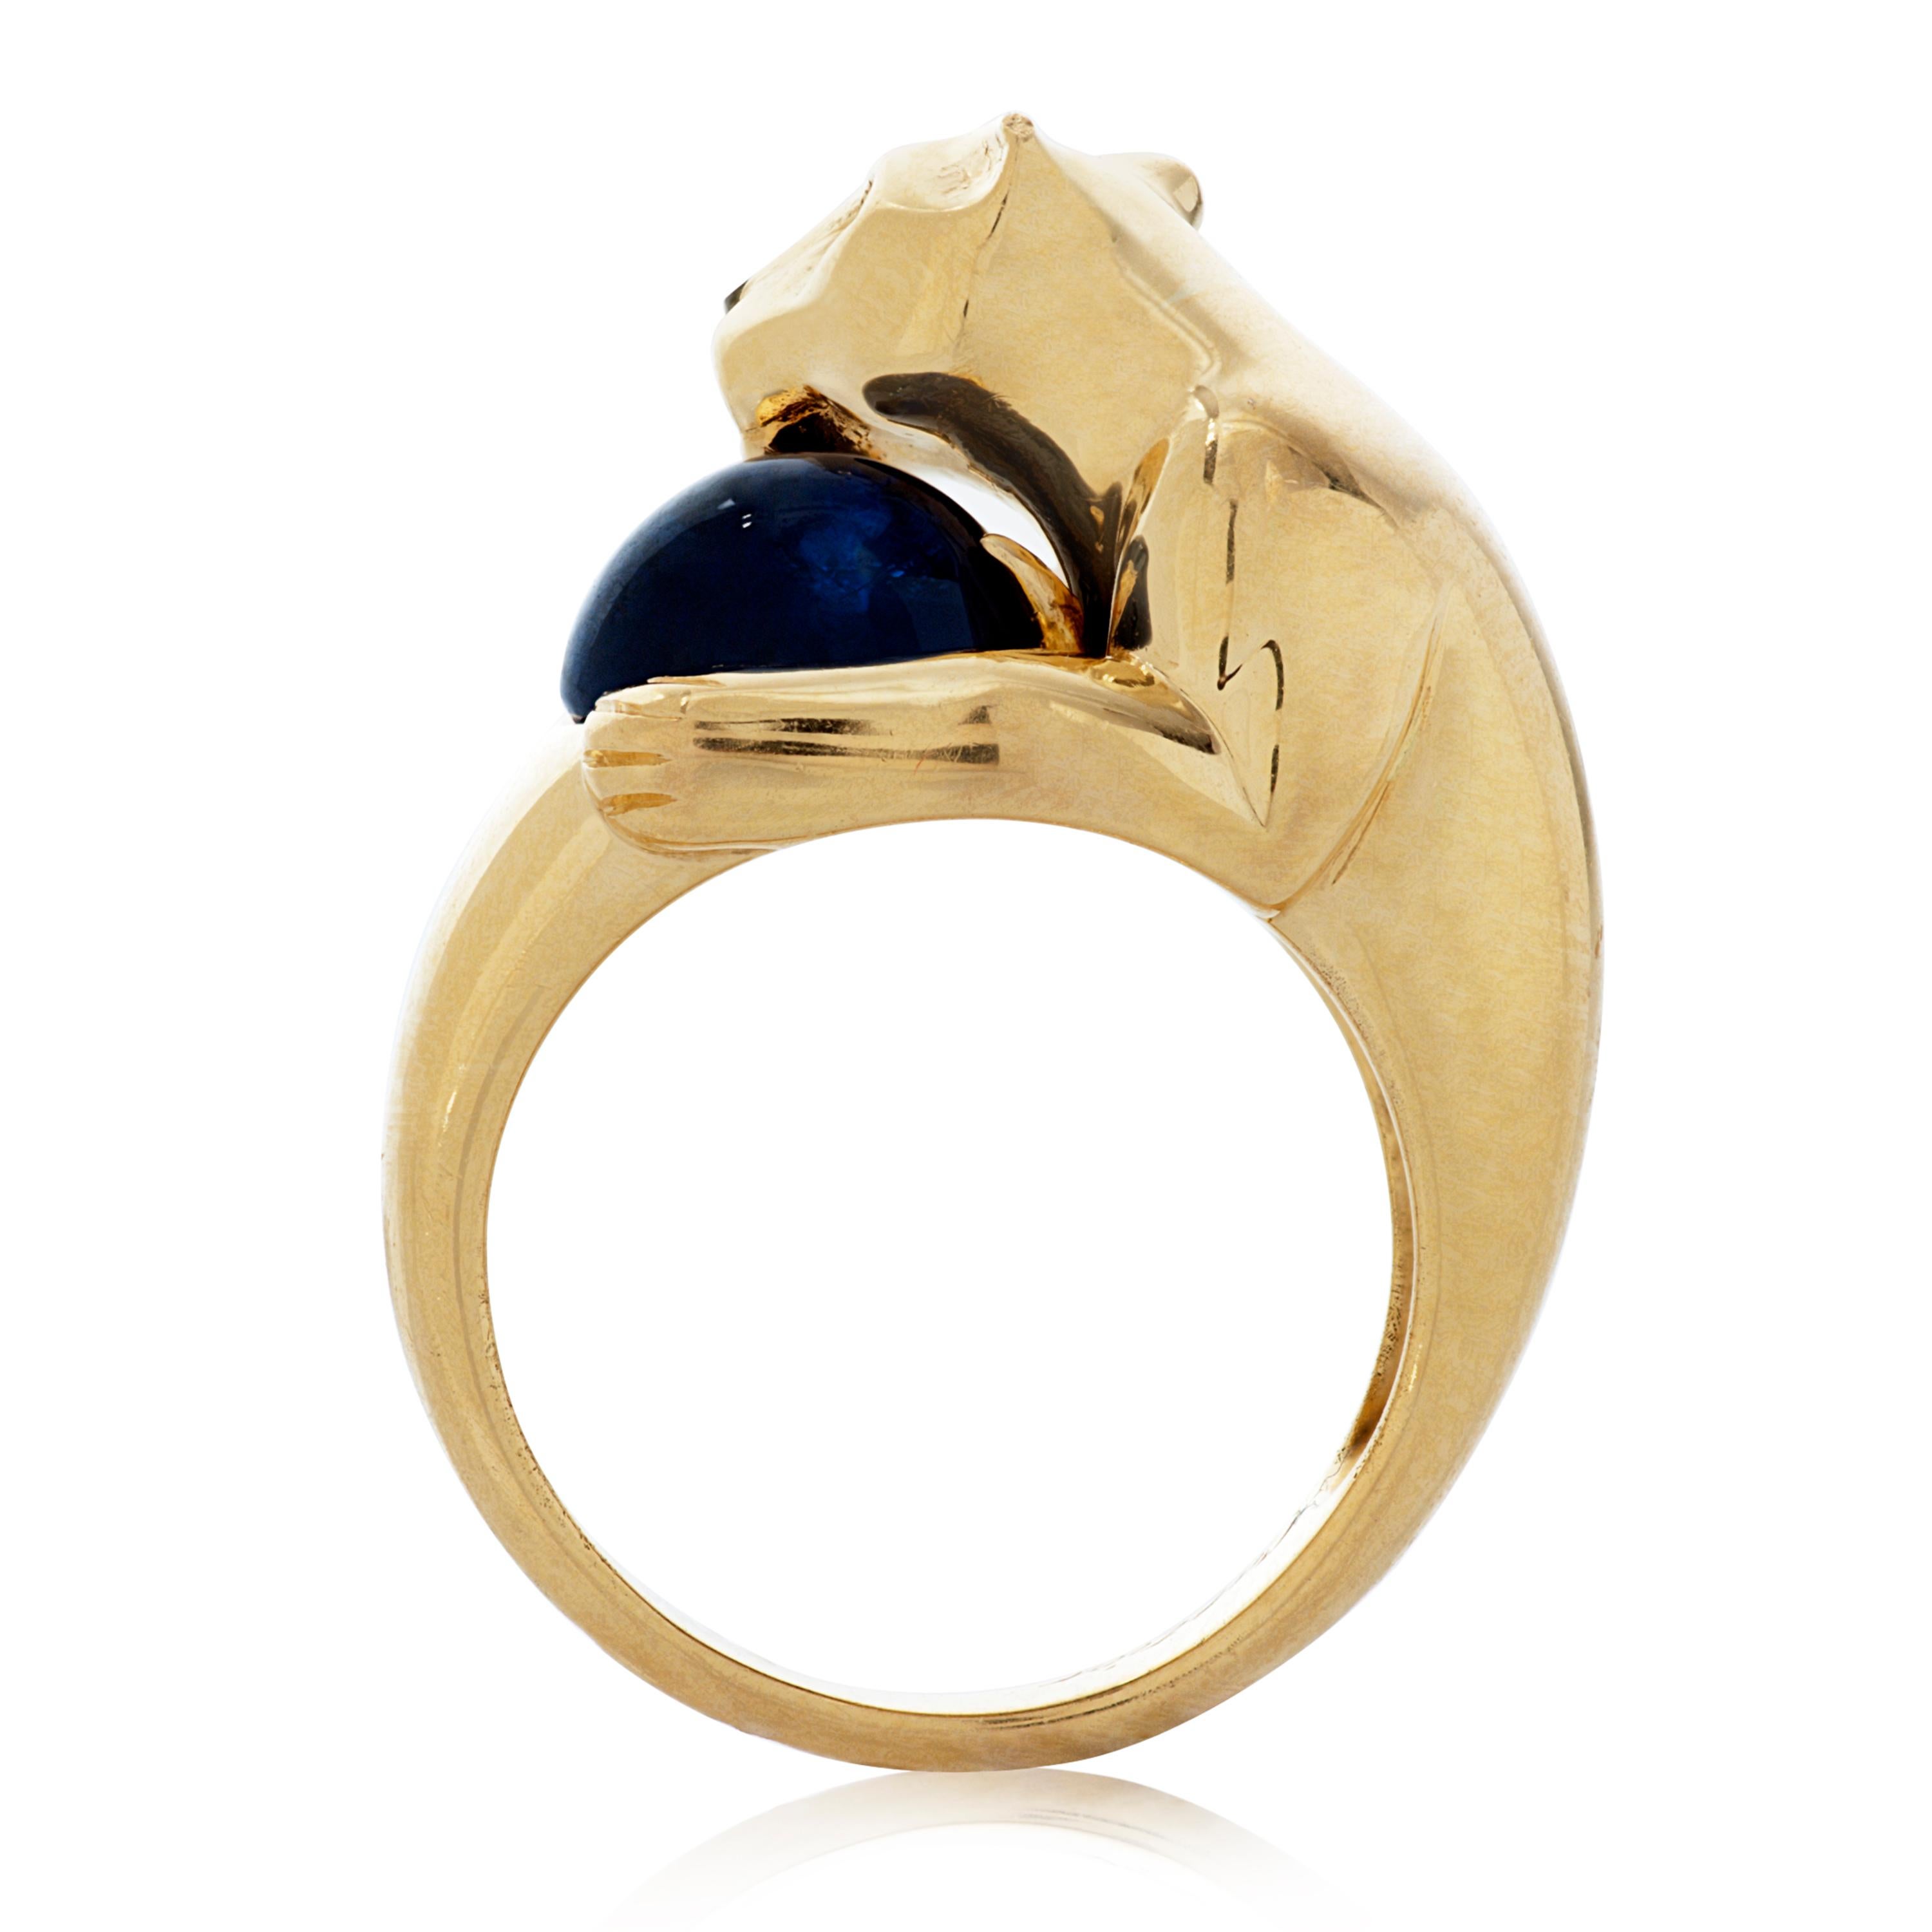 This vintage Panthere De Cartier ring features a panther holding an oval cabochon blue sapphire weighing approximately 4.40 carats.  The panther itself has two round emerald eyes and a carved onyx nose, set in 18k yellow gold.  Accompanied by